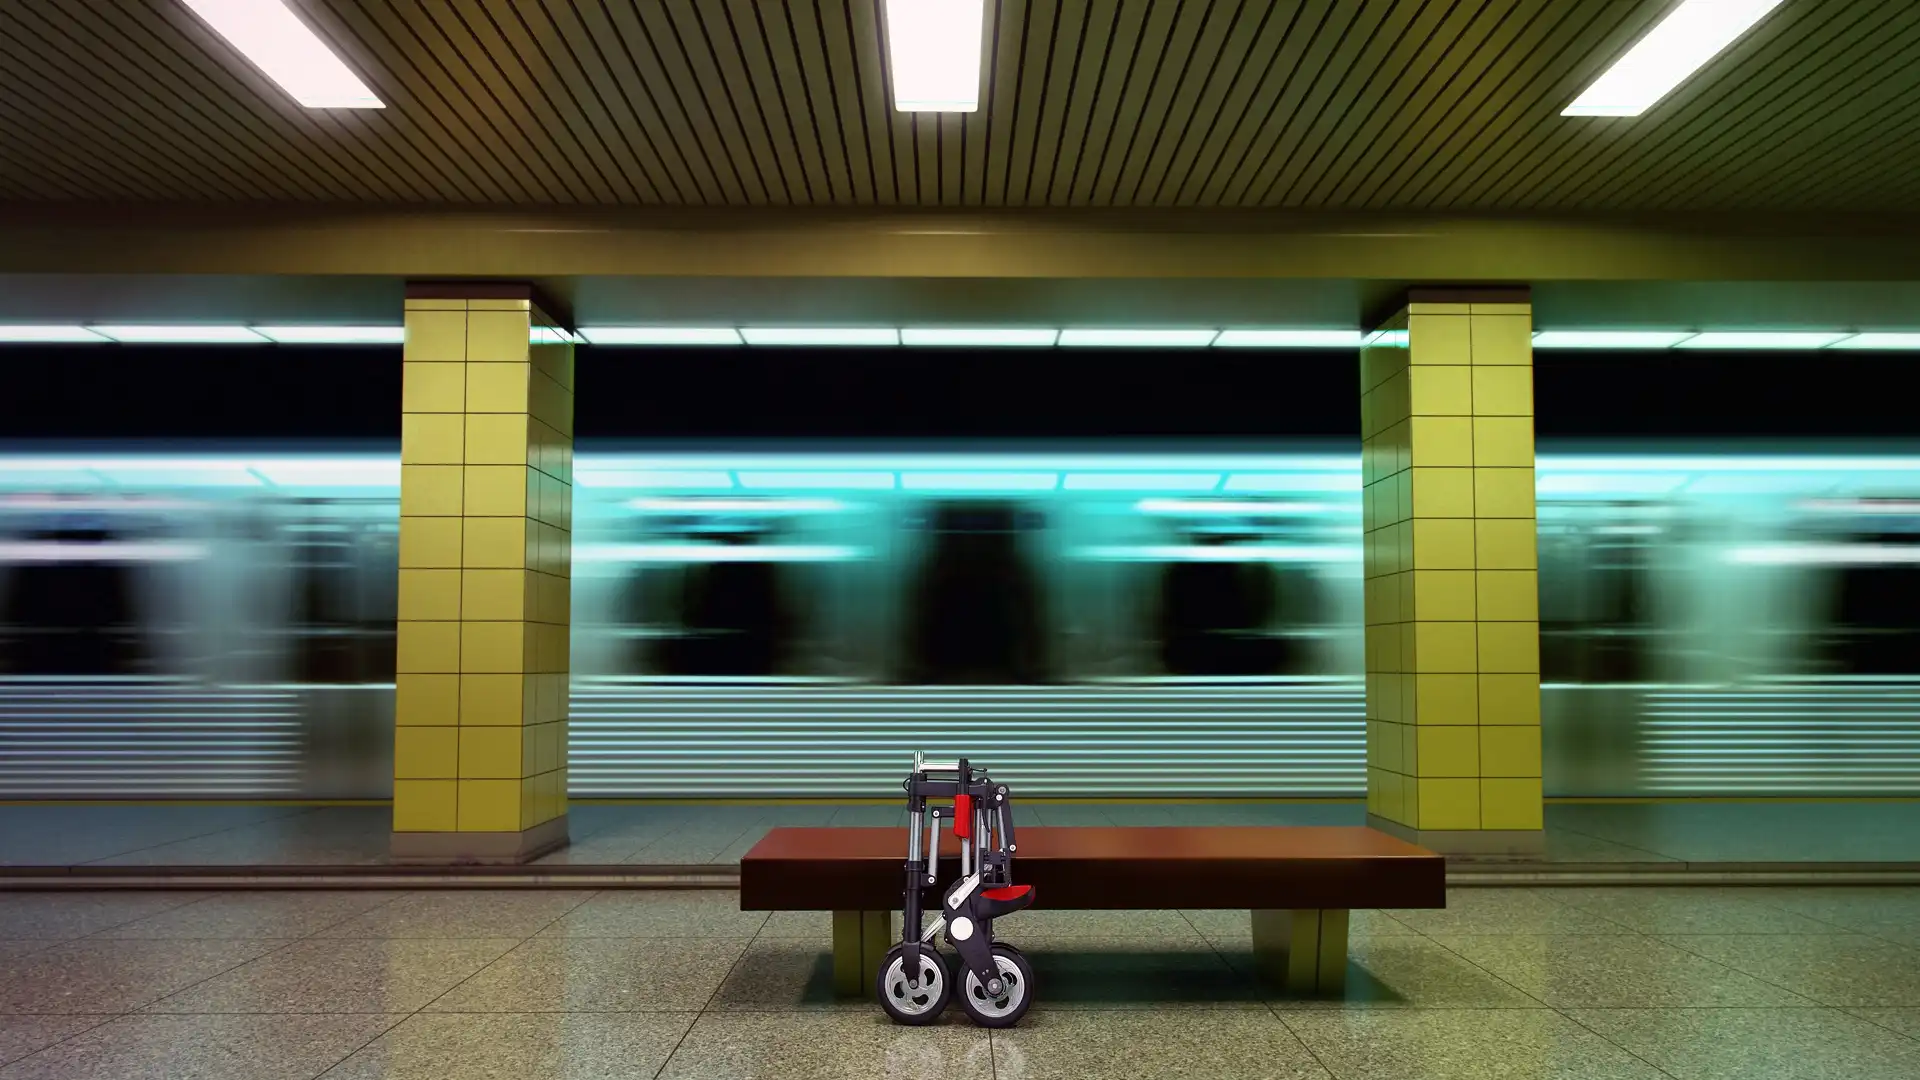 Photorealistic 3D rendering of a folded bicycle left near a bench at a subway station.